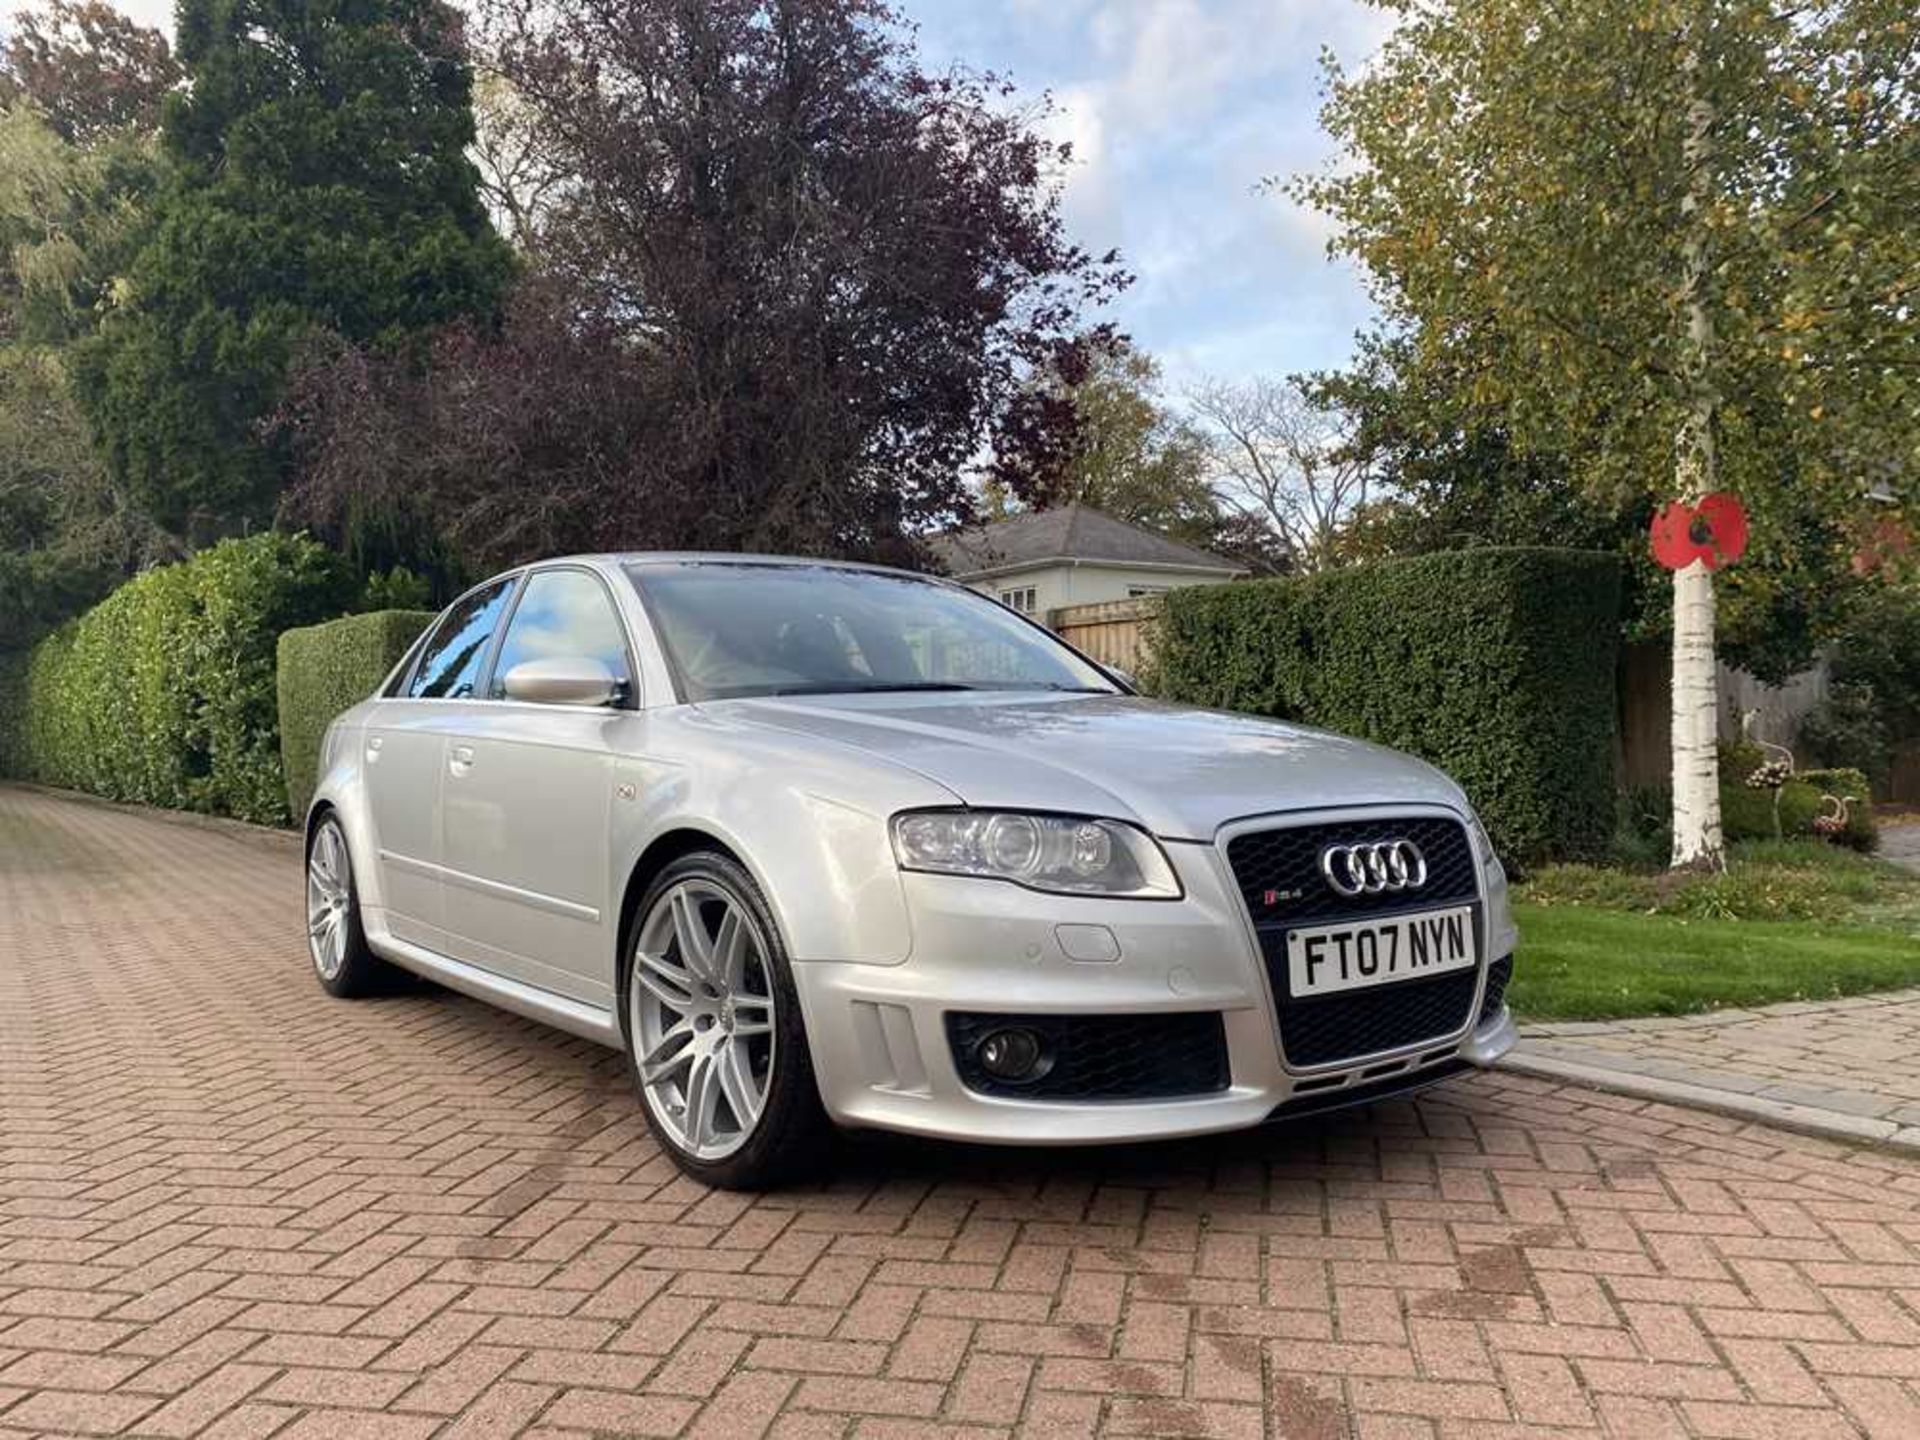 2007 Audi RS4 Saloon One owner and just c.60,000 miles from new - Image 4 of 86